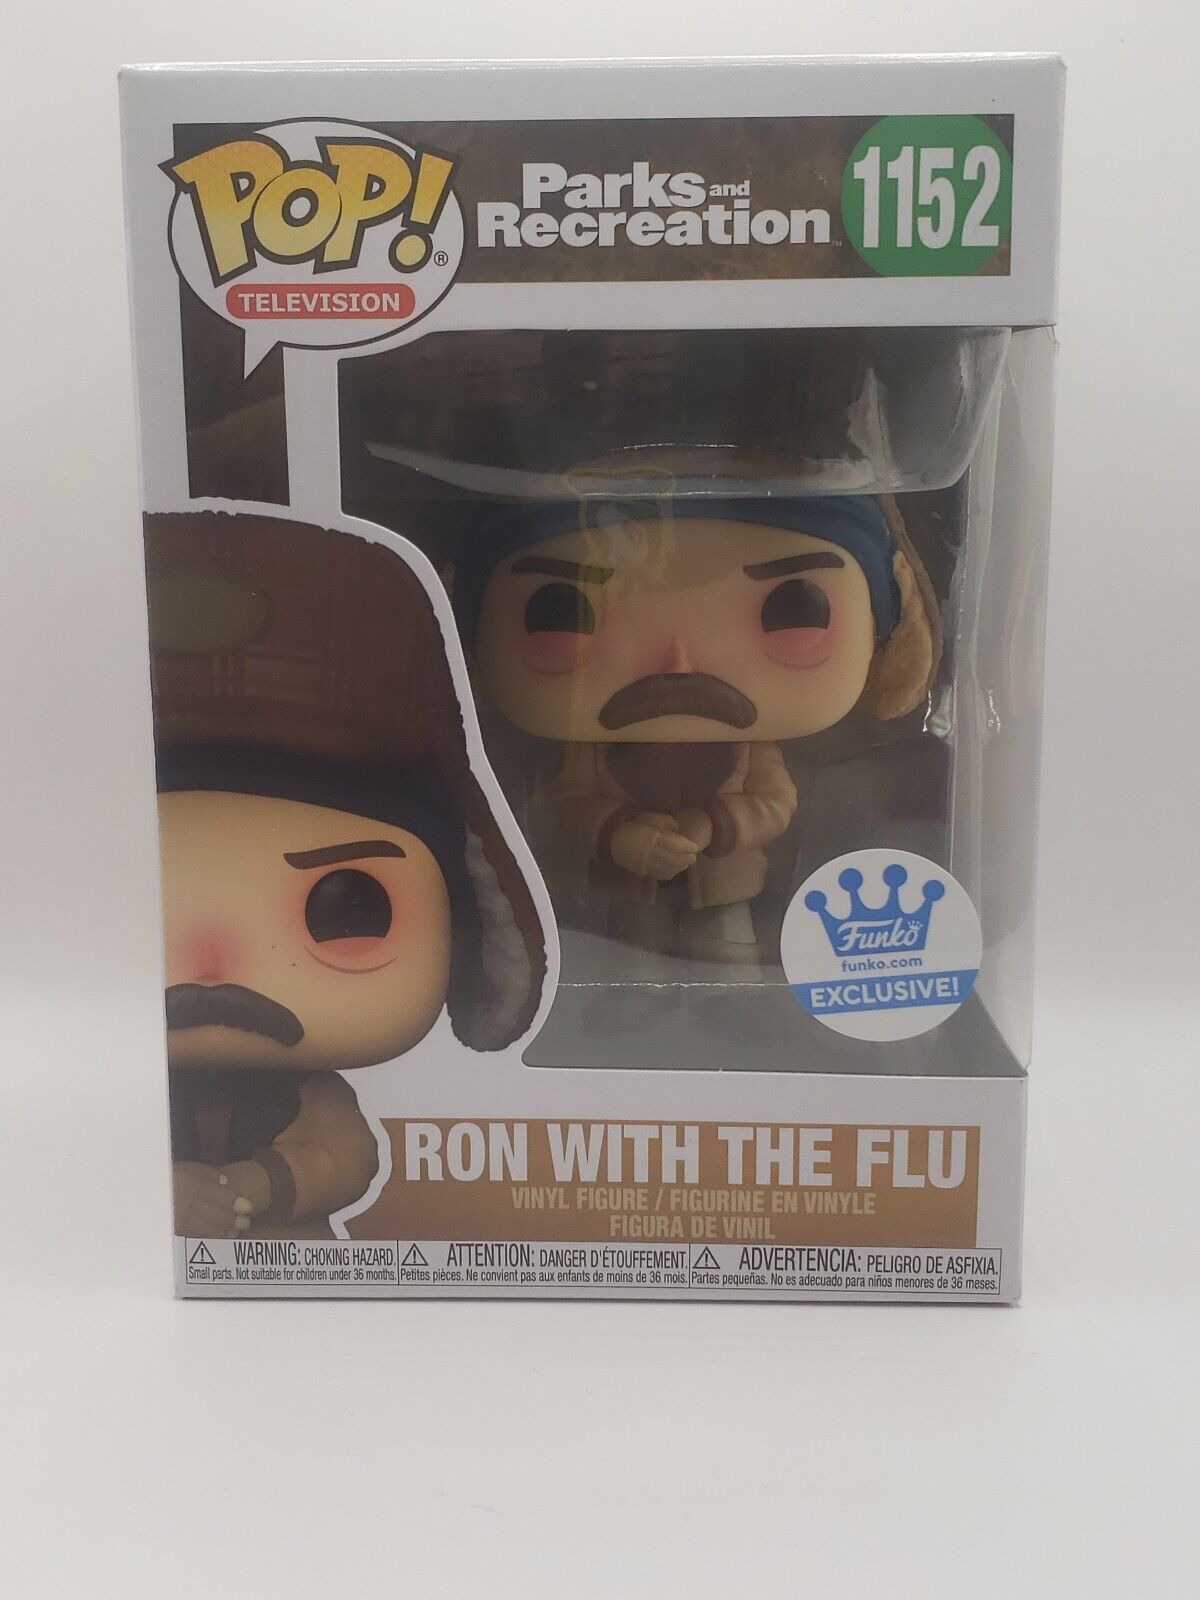 Ron with the Flu #1152 Funko Shop Exclusive Parks And Recreation PoP TV NEW 